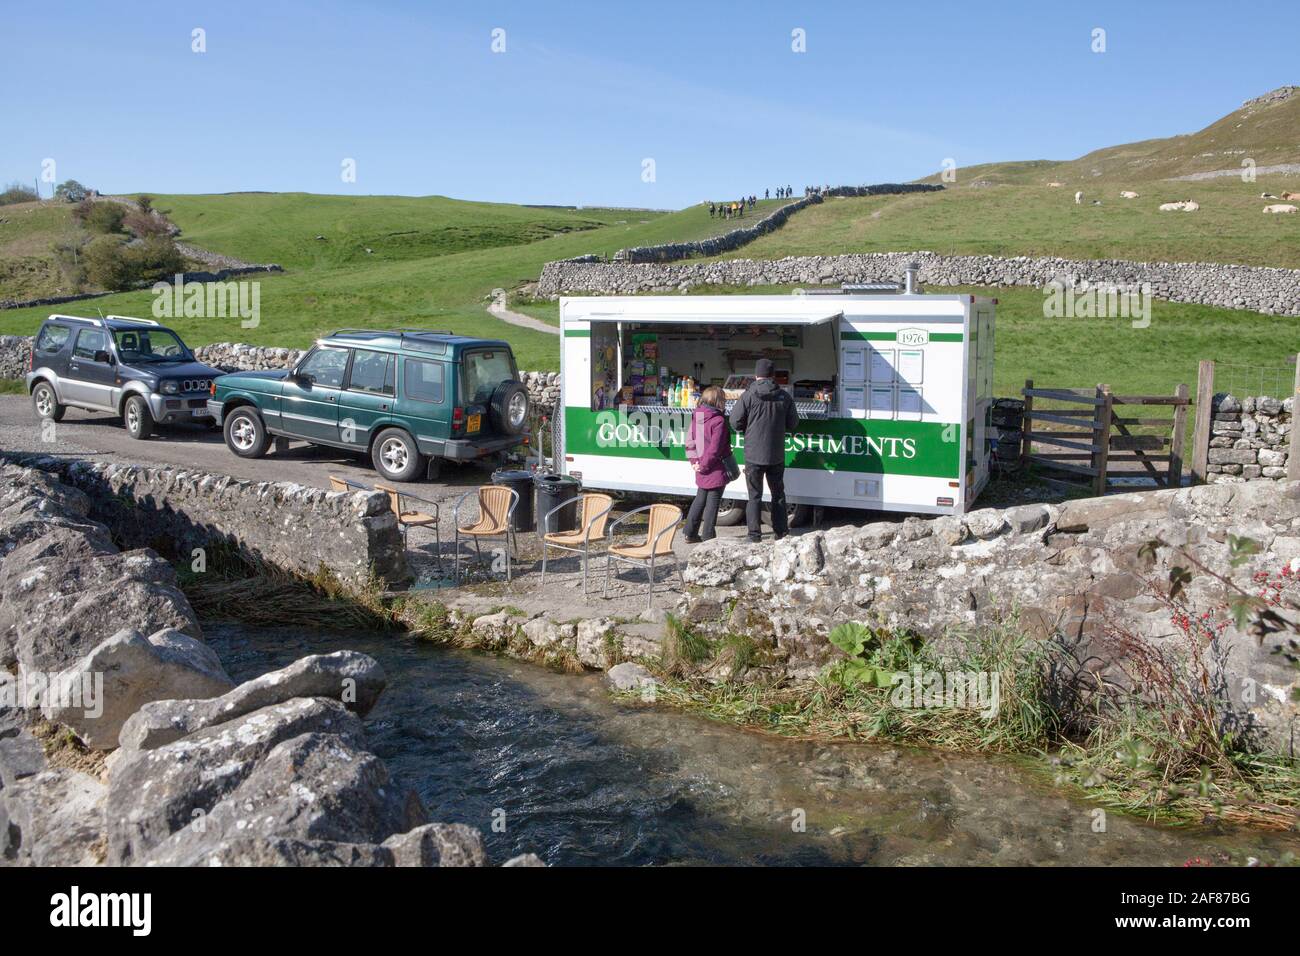 Gordale Refreshments trailer sells food and drink to walkers on the Gordale Scar / Malham Cove circular footpath, Yorkshire Stock Photo